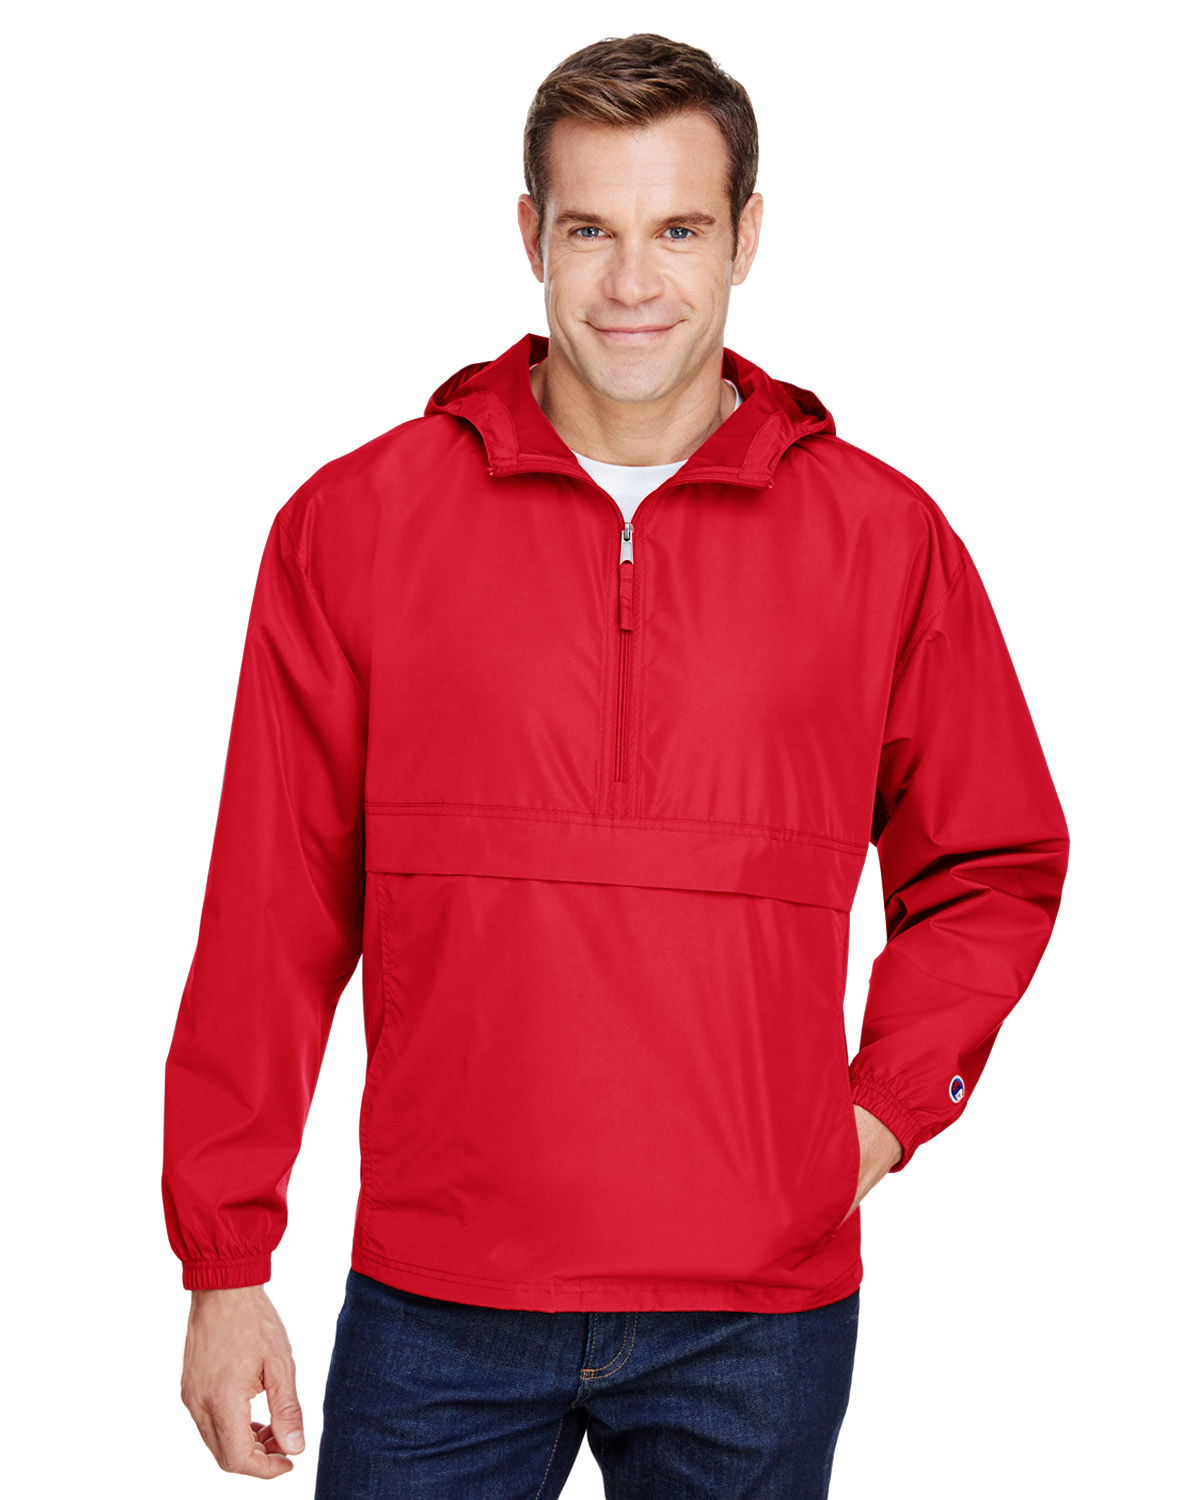 champion jackets red